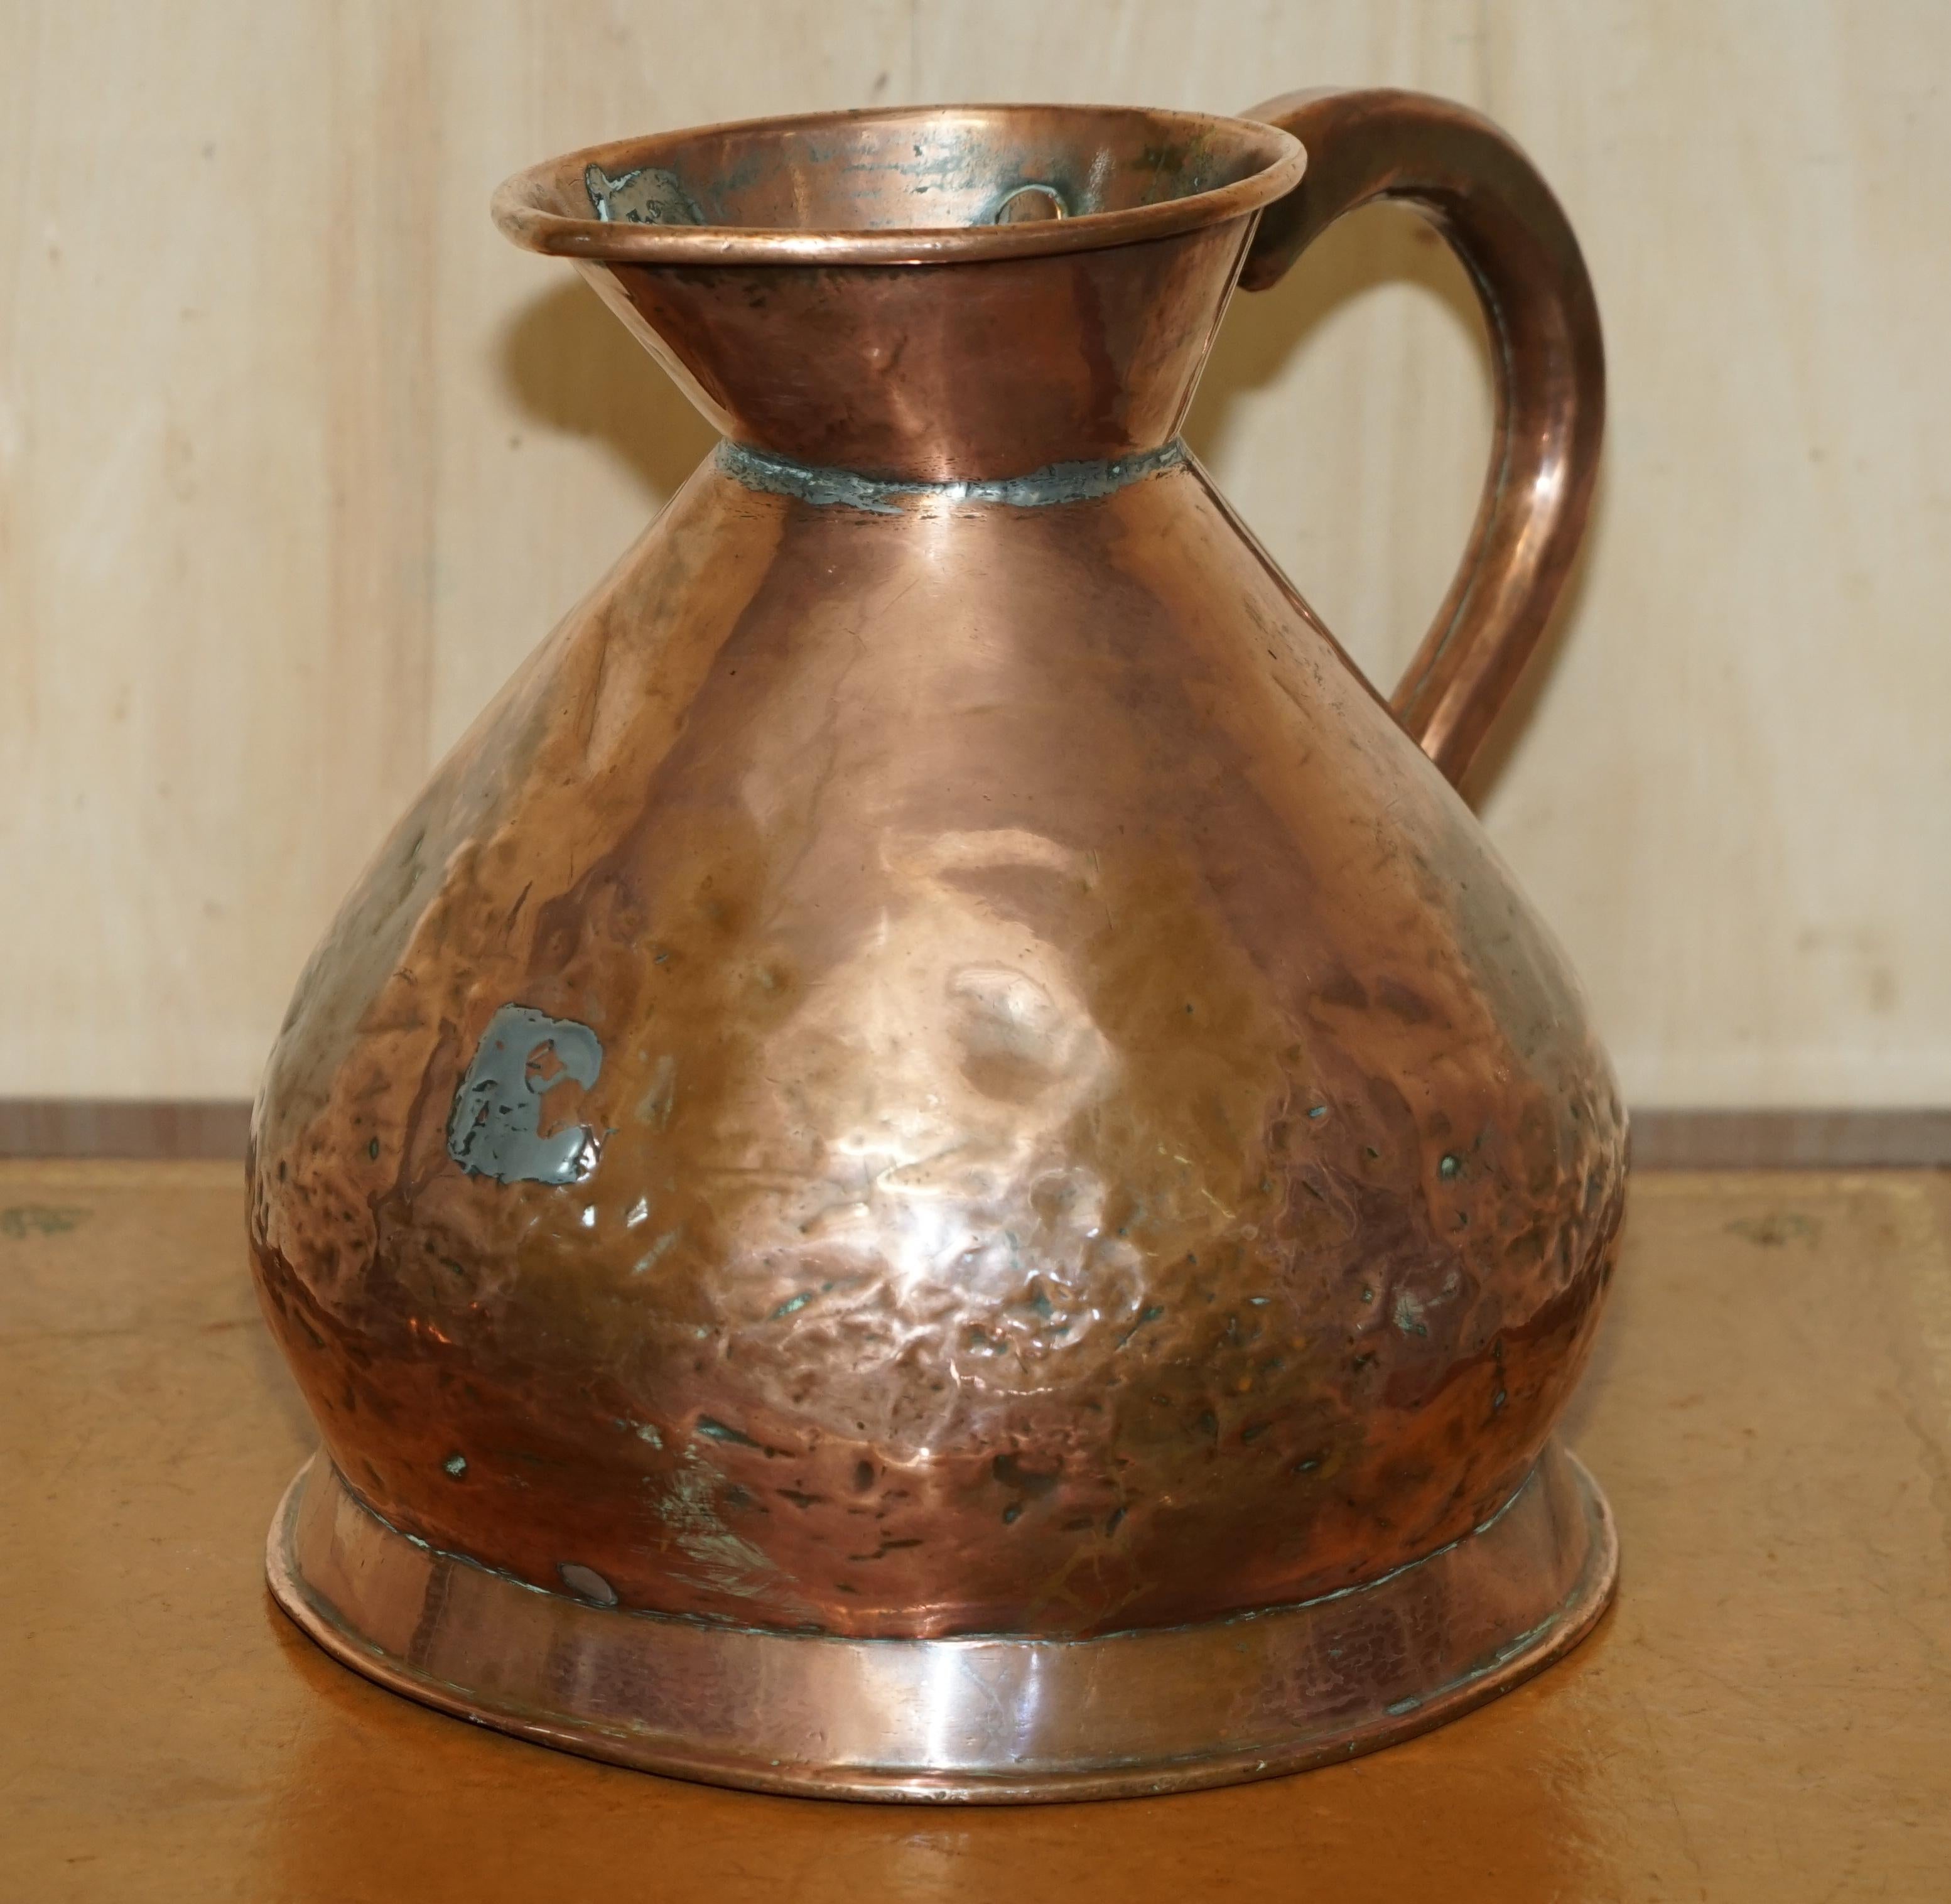 We are delighted to offer for sale this stunning original circa 1780 – 1800 Georgian Copper & Brass 2 Gallon Pitcher jug

I have two of these, the second jug is a later Victorian example and is listed under my other items

The jug has all the